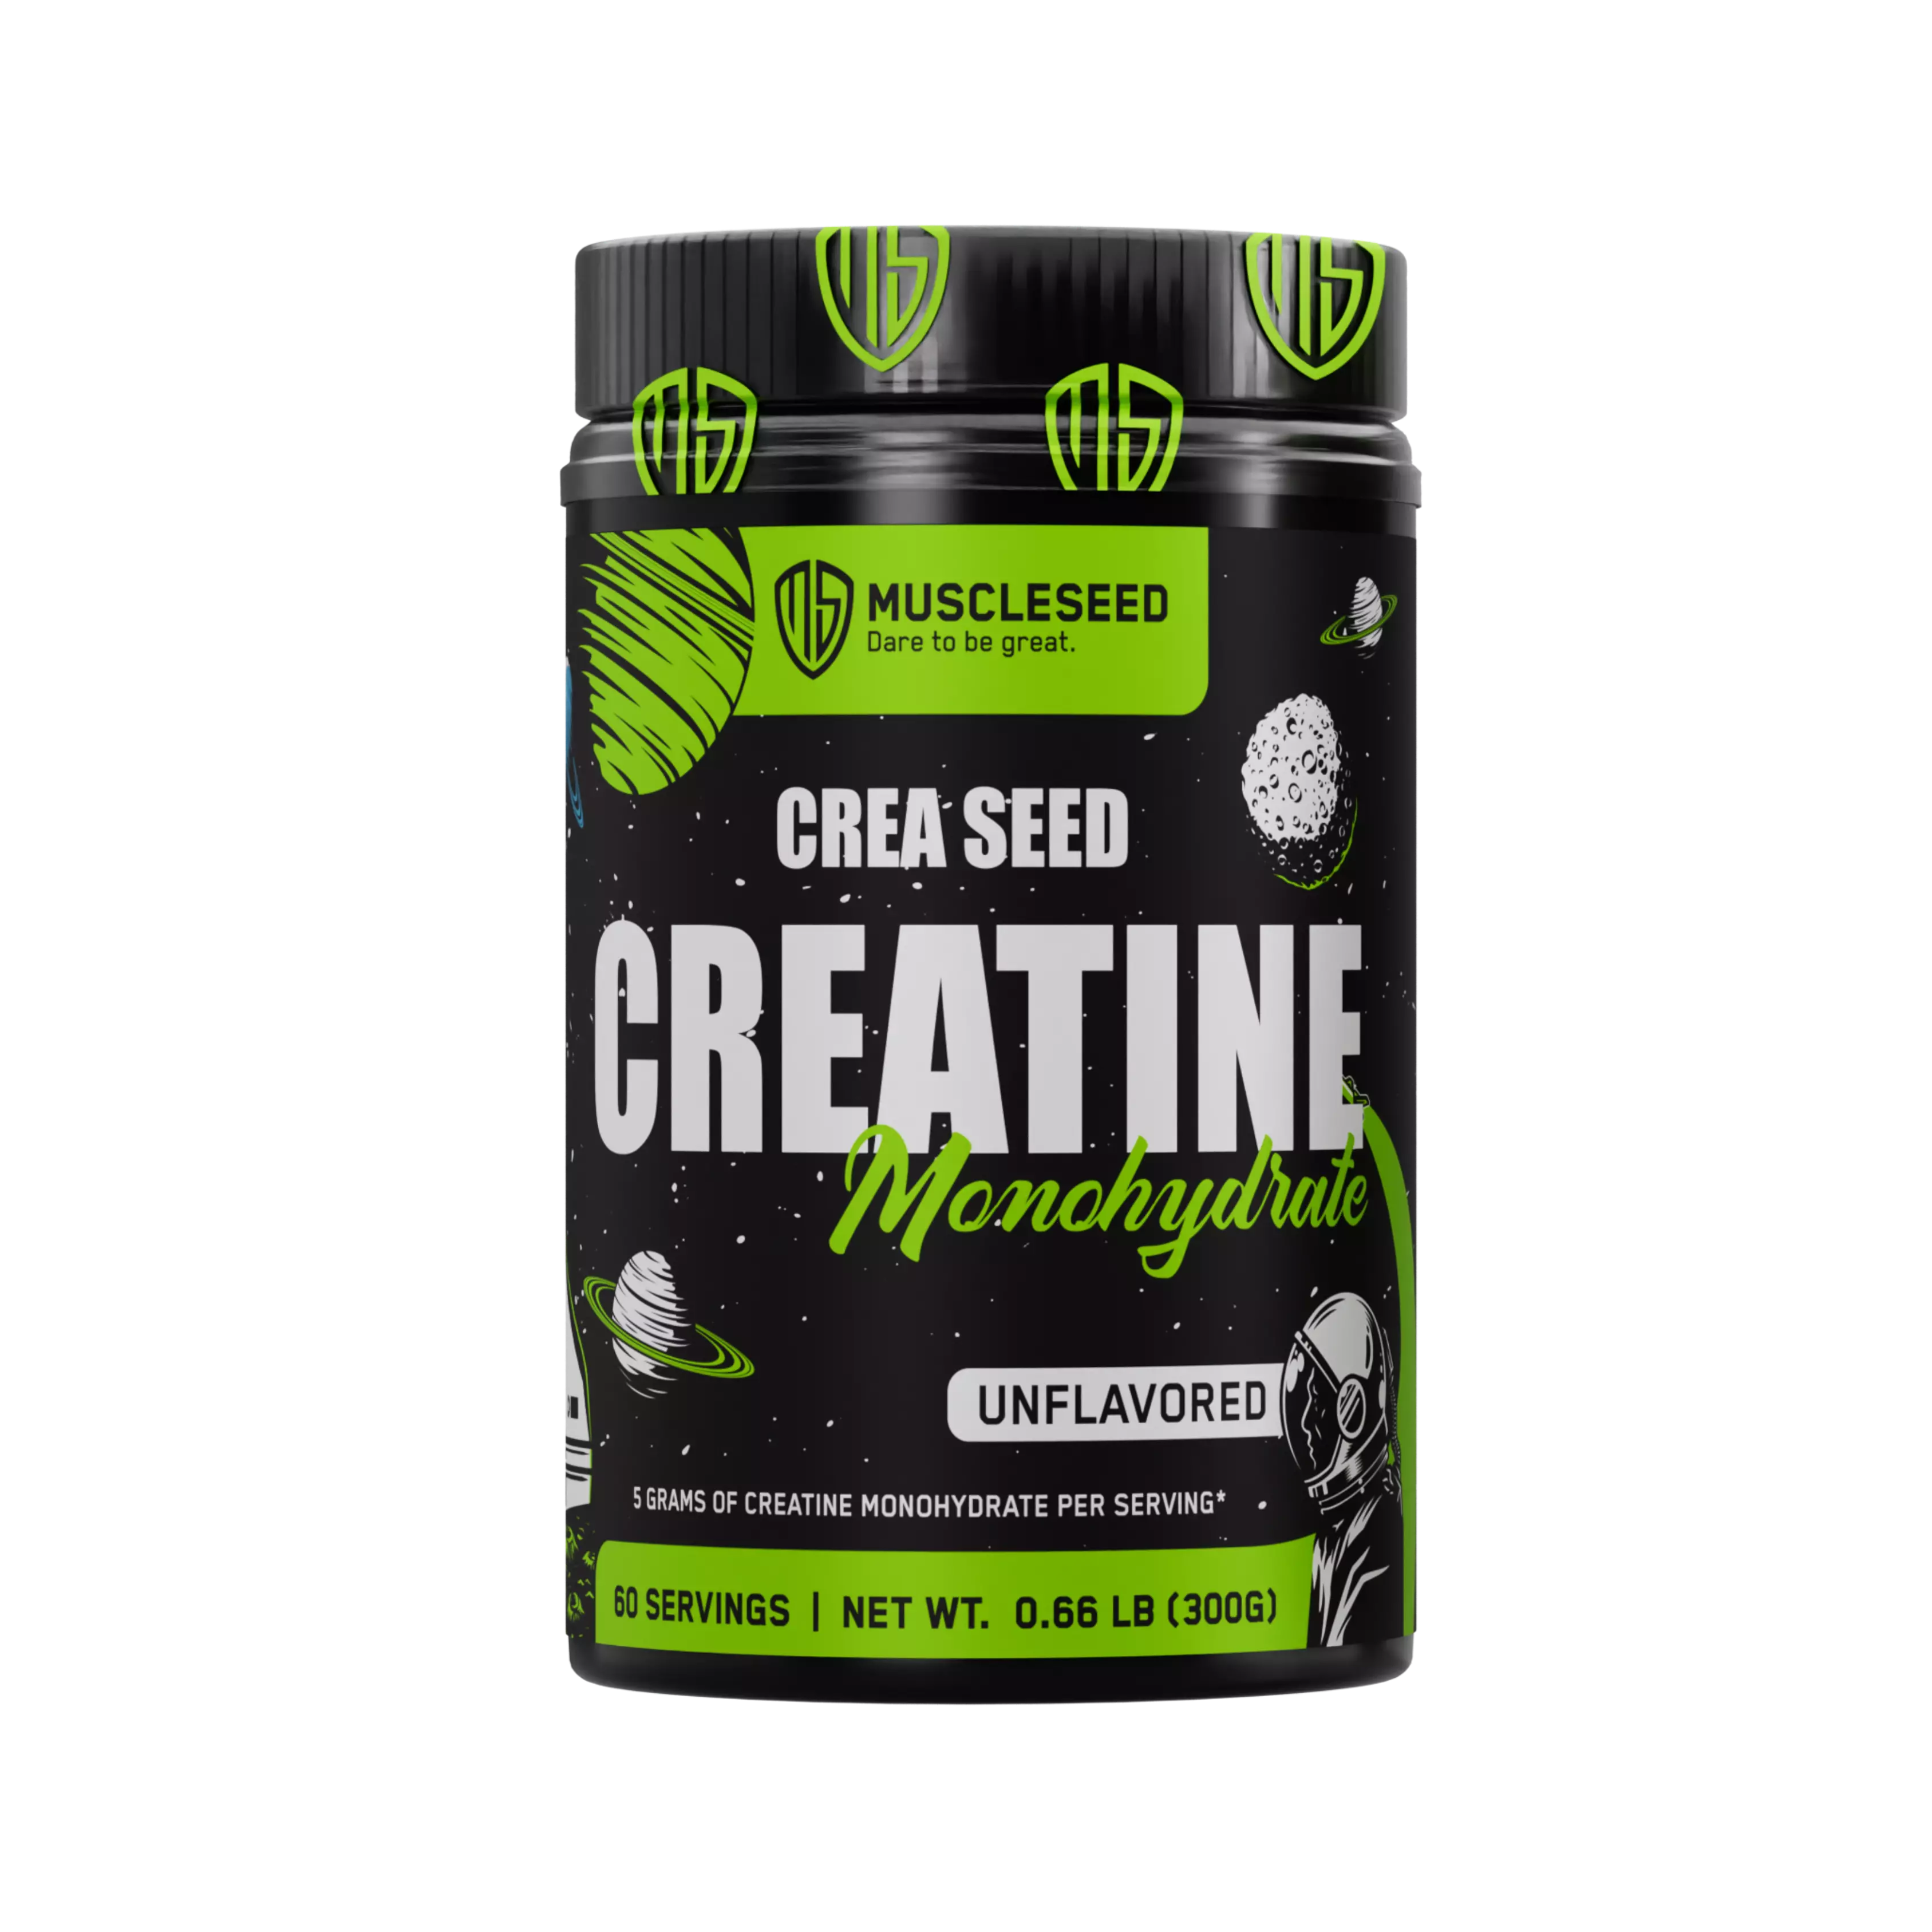 <h3><strong><span style="color: #000000ff">CREASEED MONOHYDRATE 60SERV</span></strong></h3>